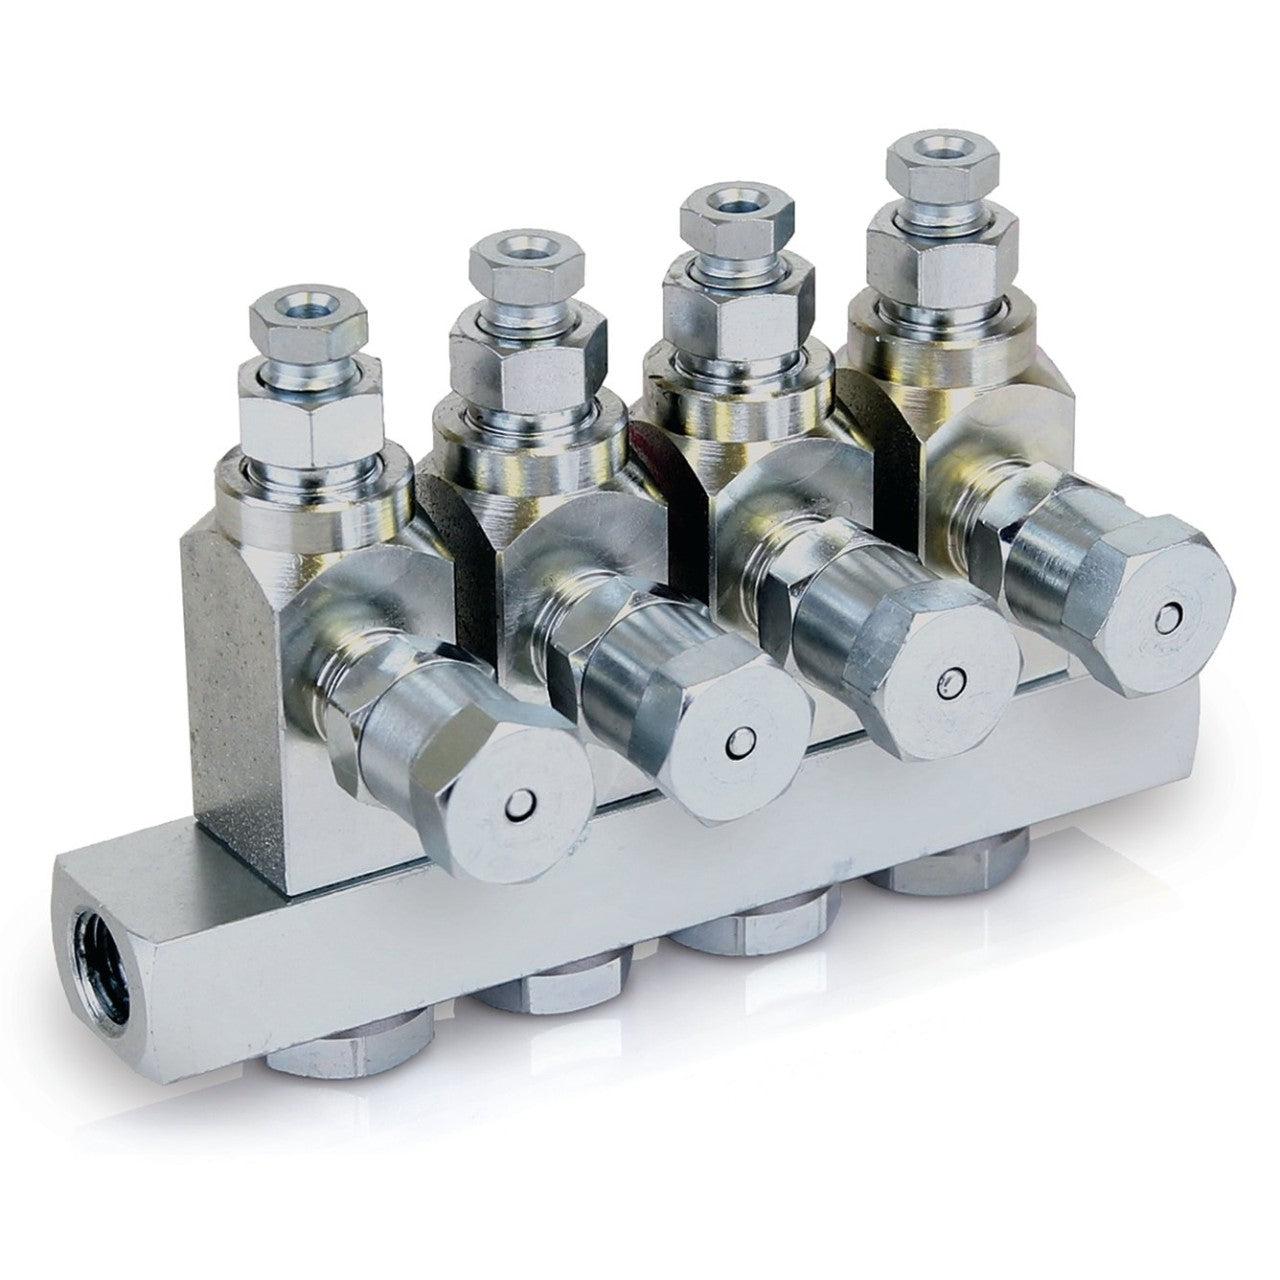 GL-32™ Grease Injector, 304 Stainless Steel, 4-Injector Manifold, 1/8 in. BSPP x 6 mm